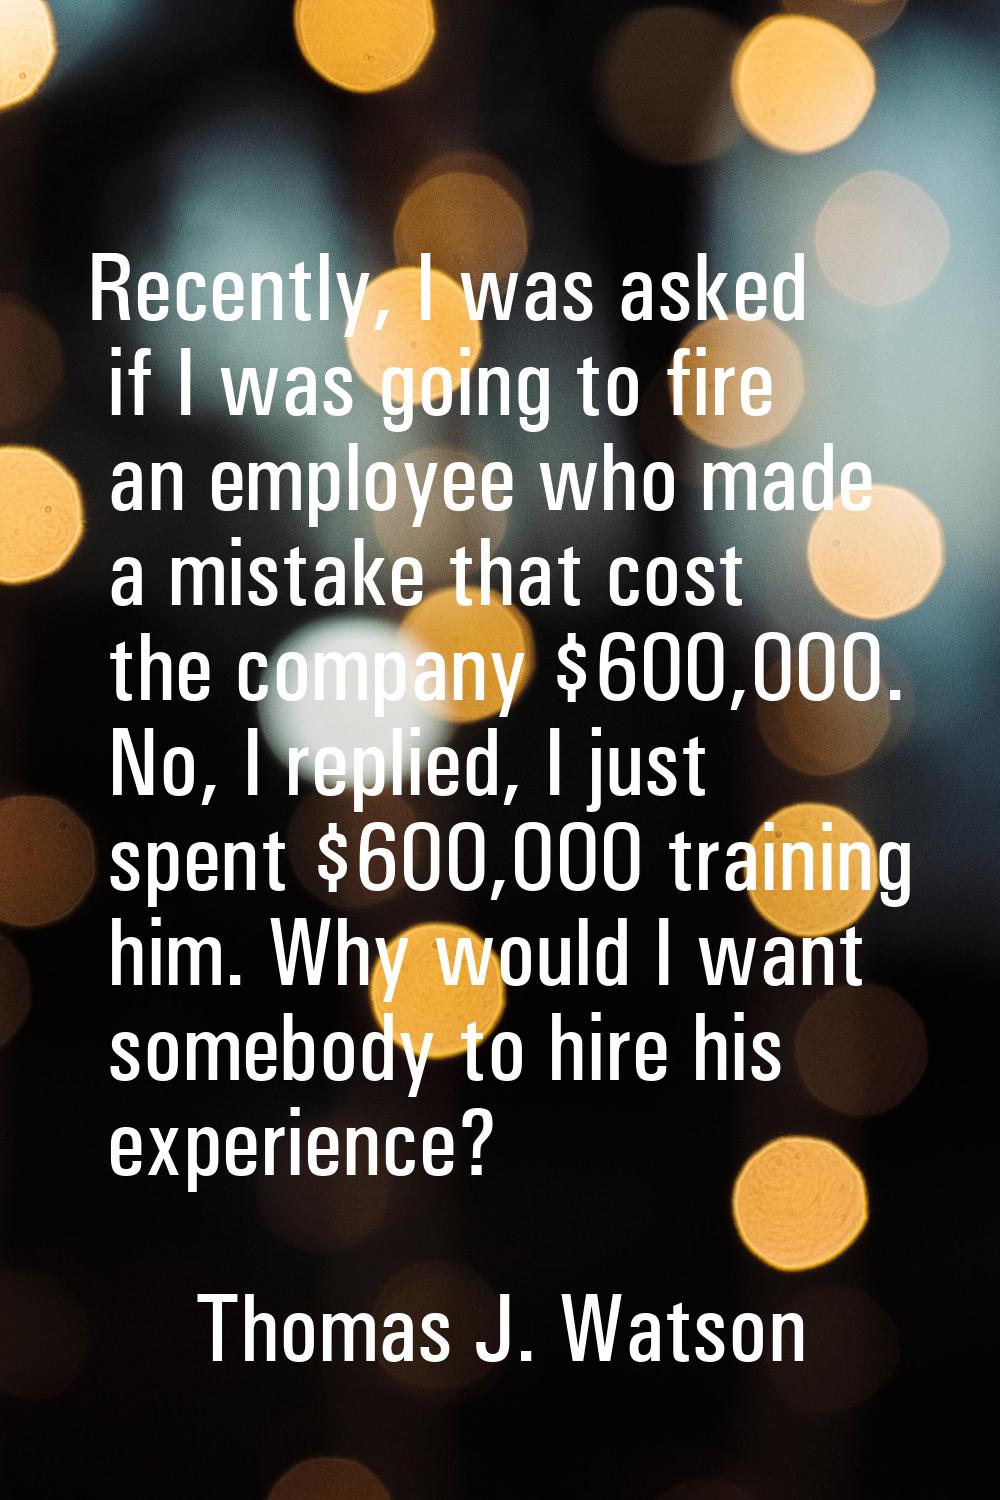 Recently, I was asked if I was going to fire an employee who made a mistake that cost the company $